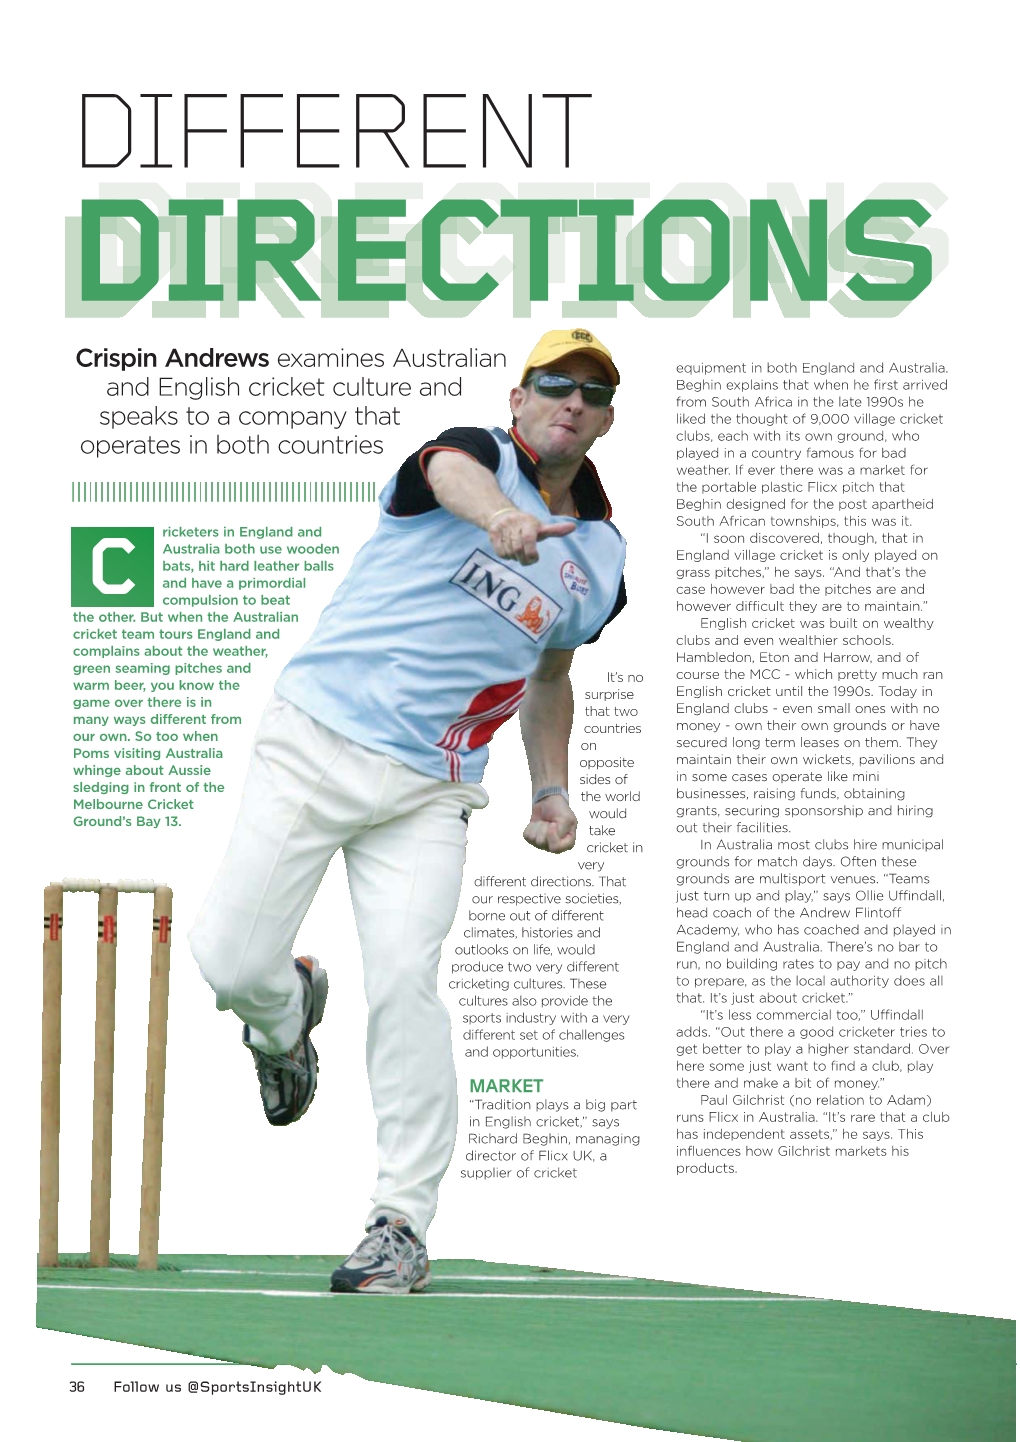 Download the Different Directions Article from The